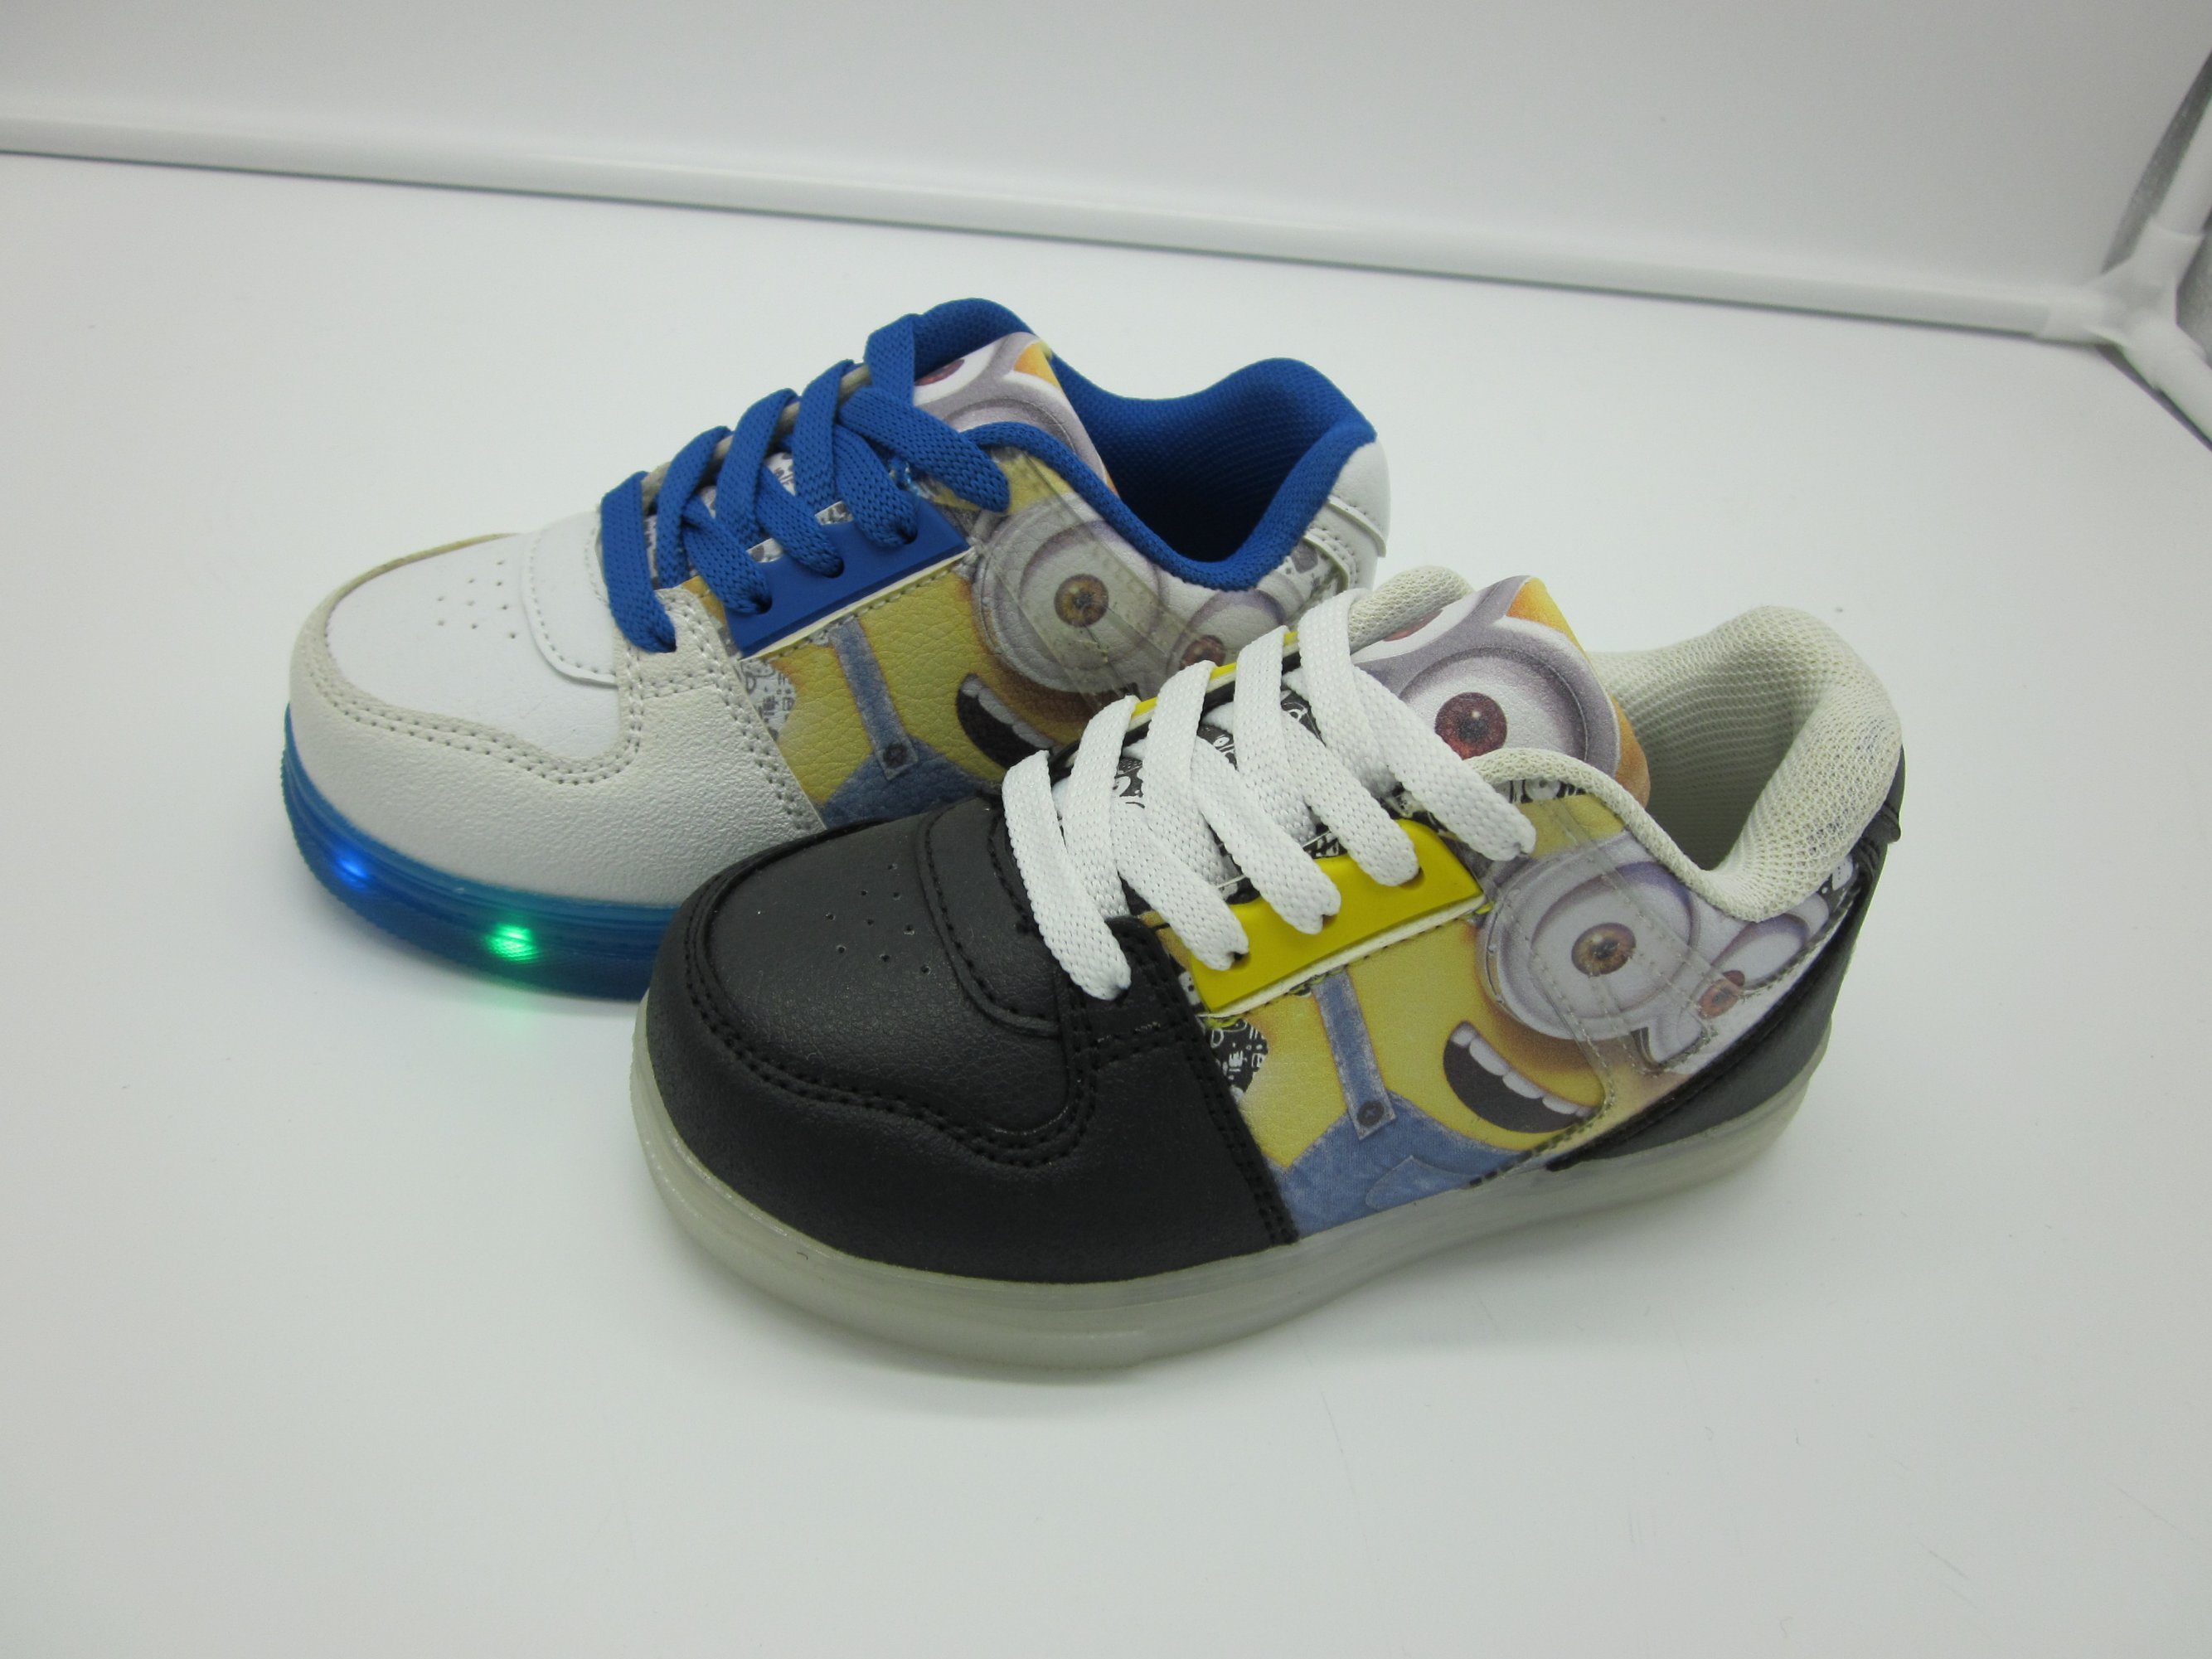 The Boys and Girls Casual Shoes USB LED Shoes for Kids